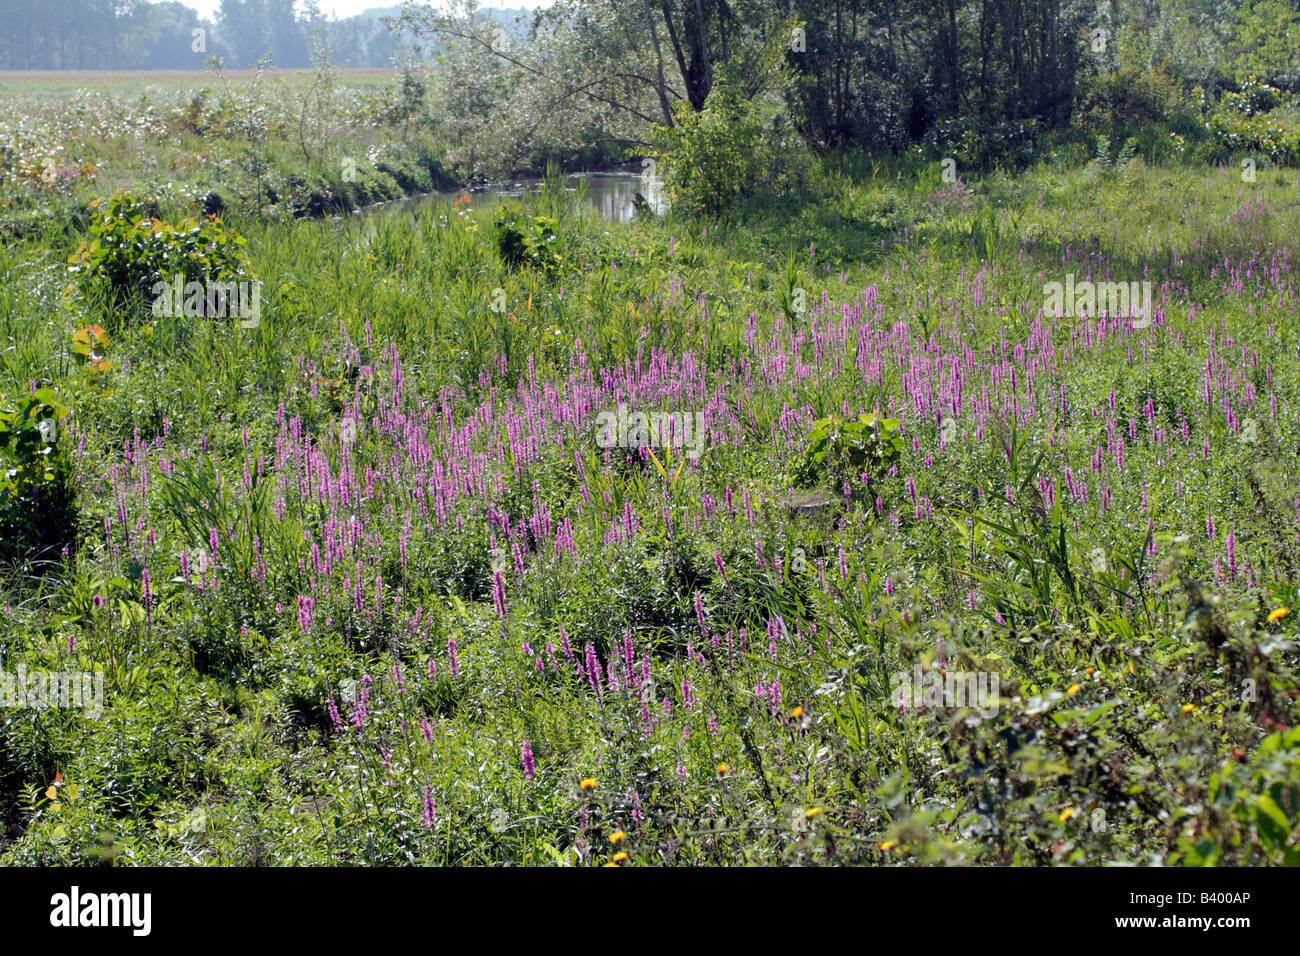 PURPLE LOOSESTRIFE LYTHRUM SALICARIA GROWING IN A WATERMEADOW NEAR RIVER INDRE FRANCE Stock Photo